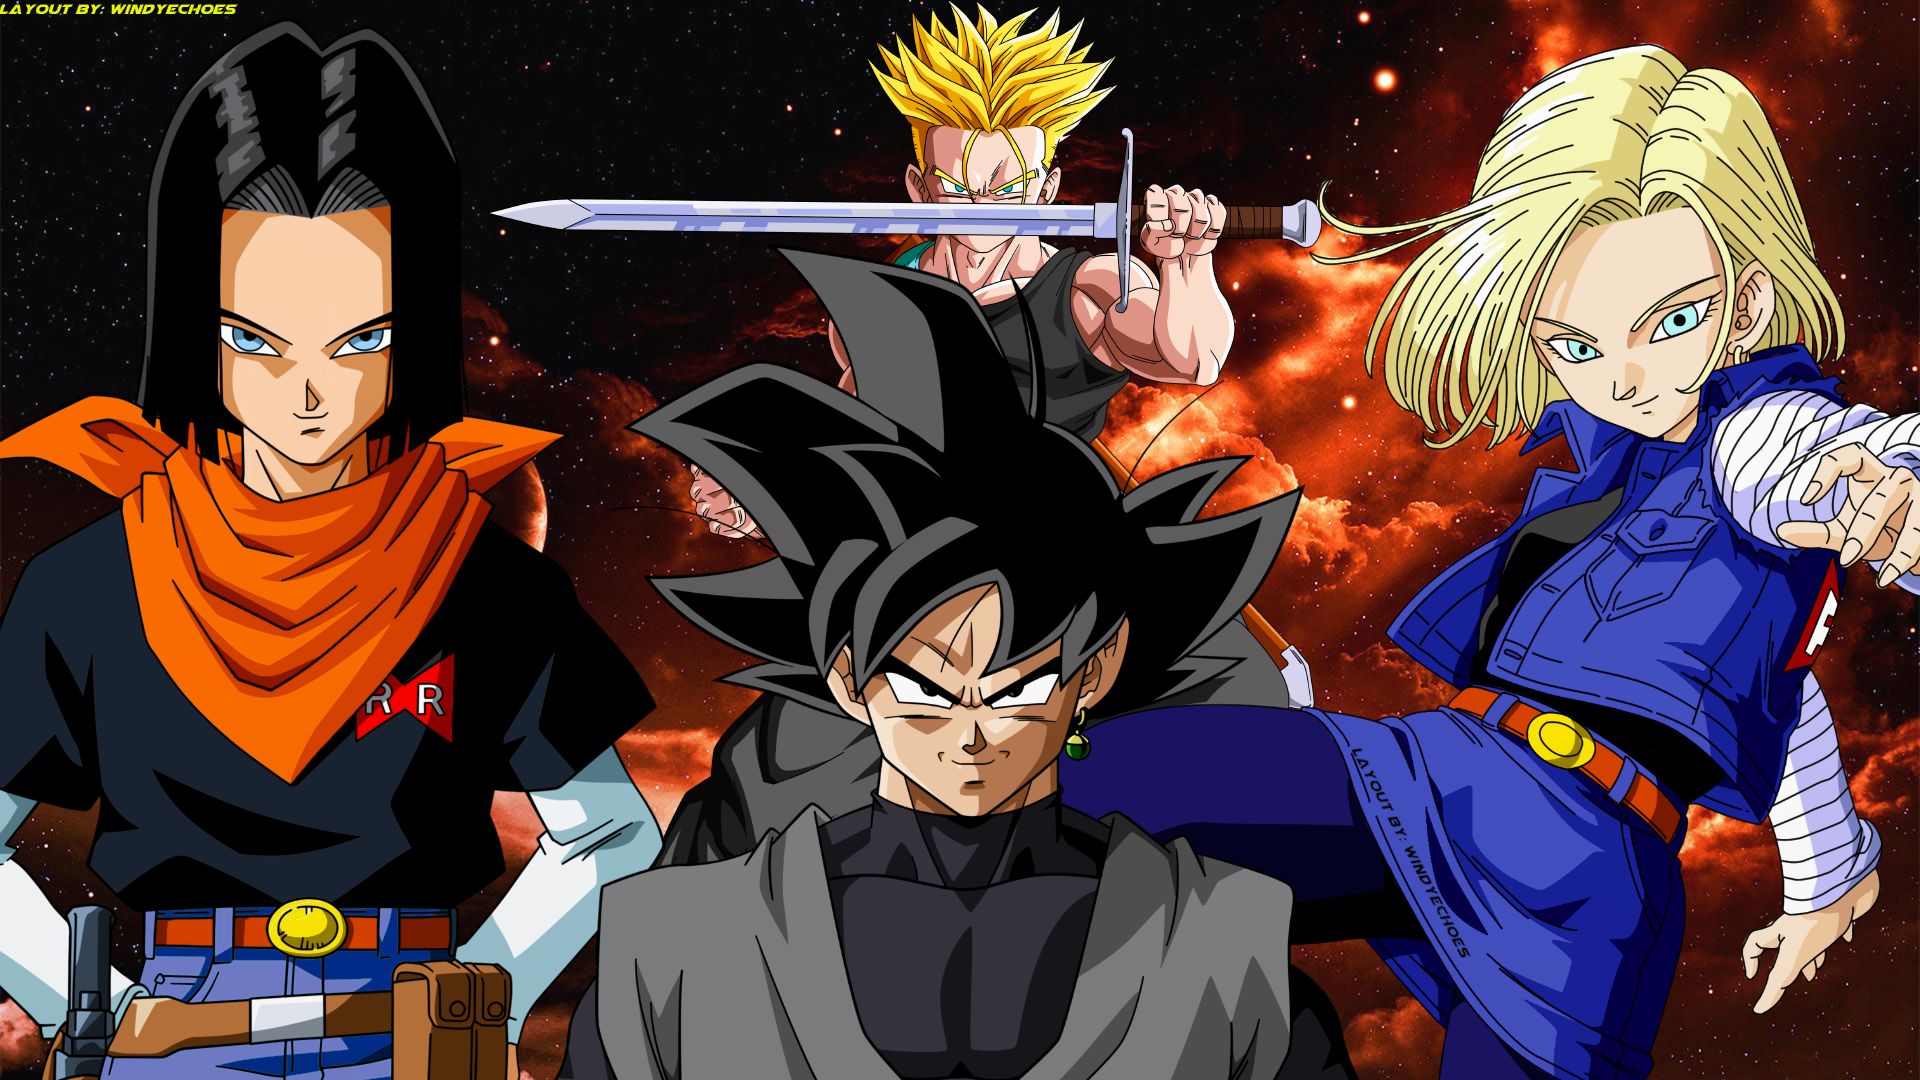 Dragon Ball Z And Dragon Ball Super Wallpaper by WindyEchoes on